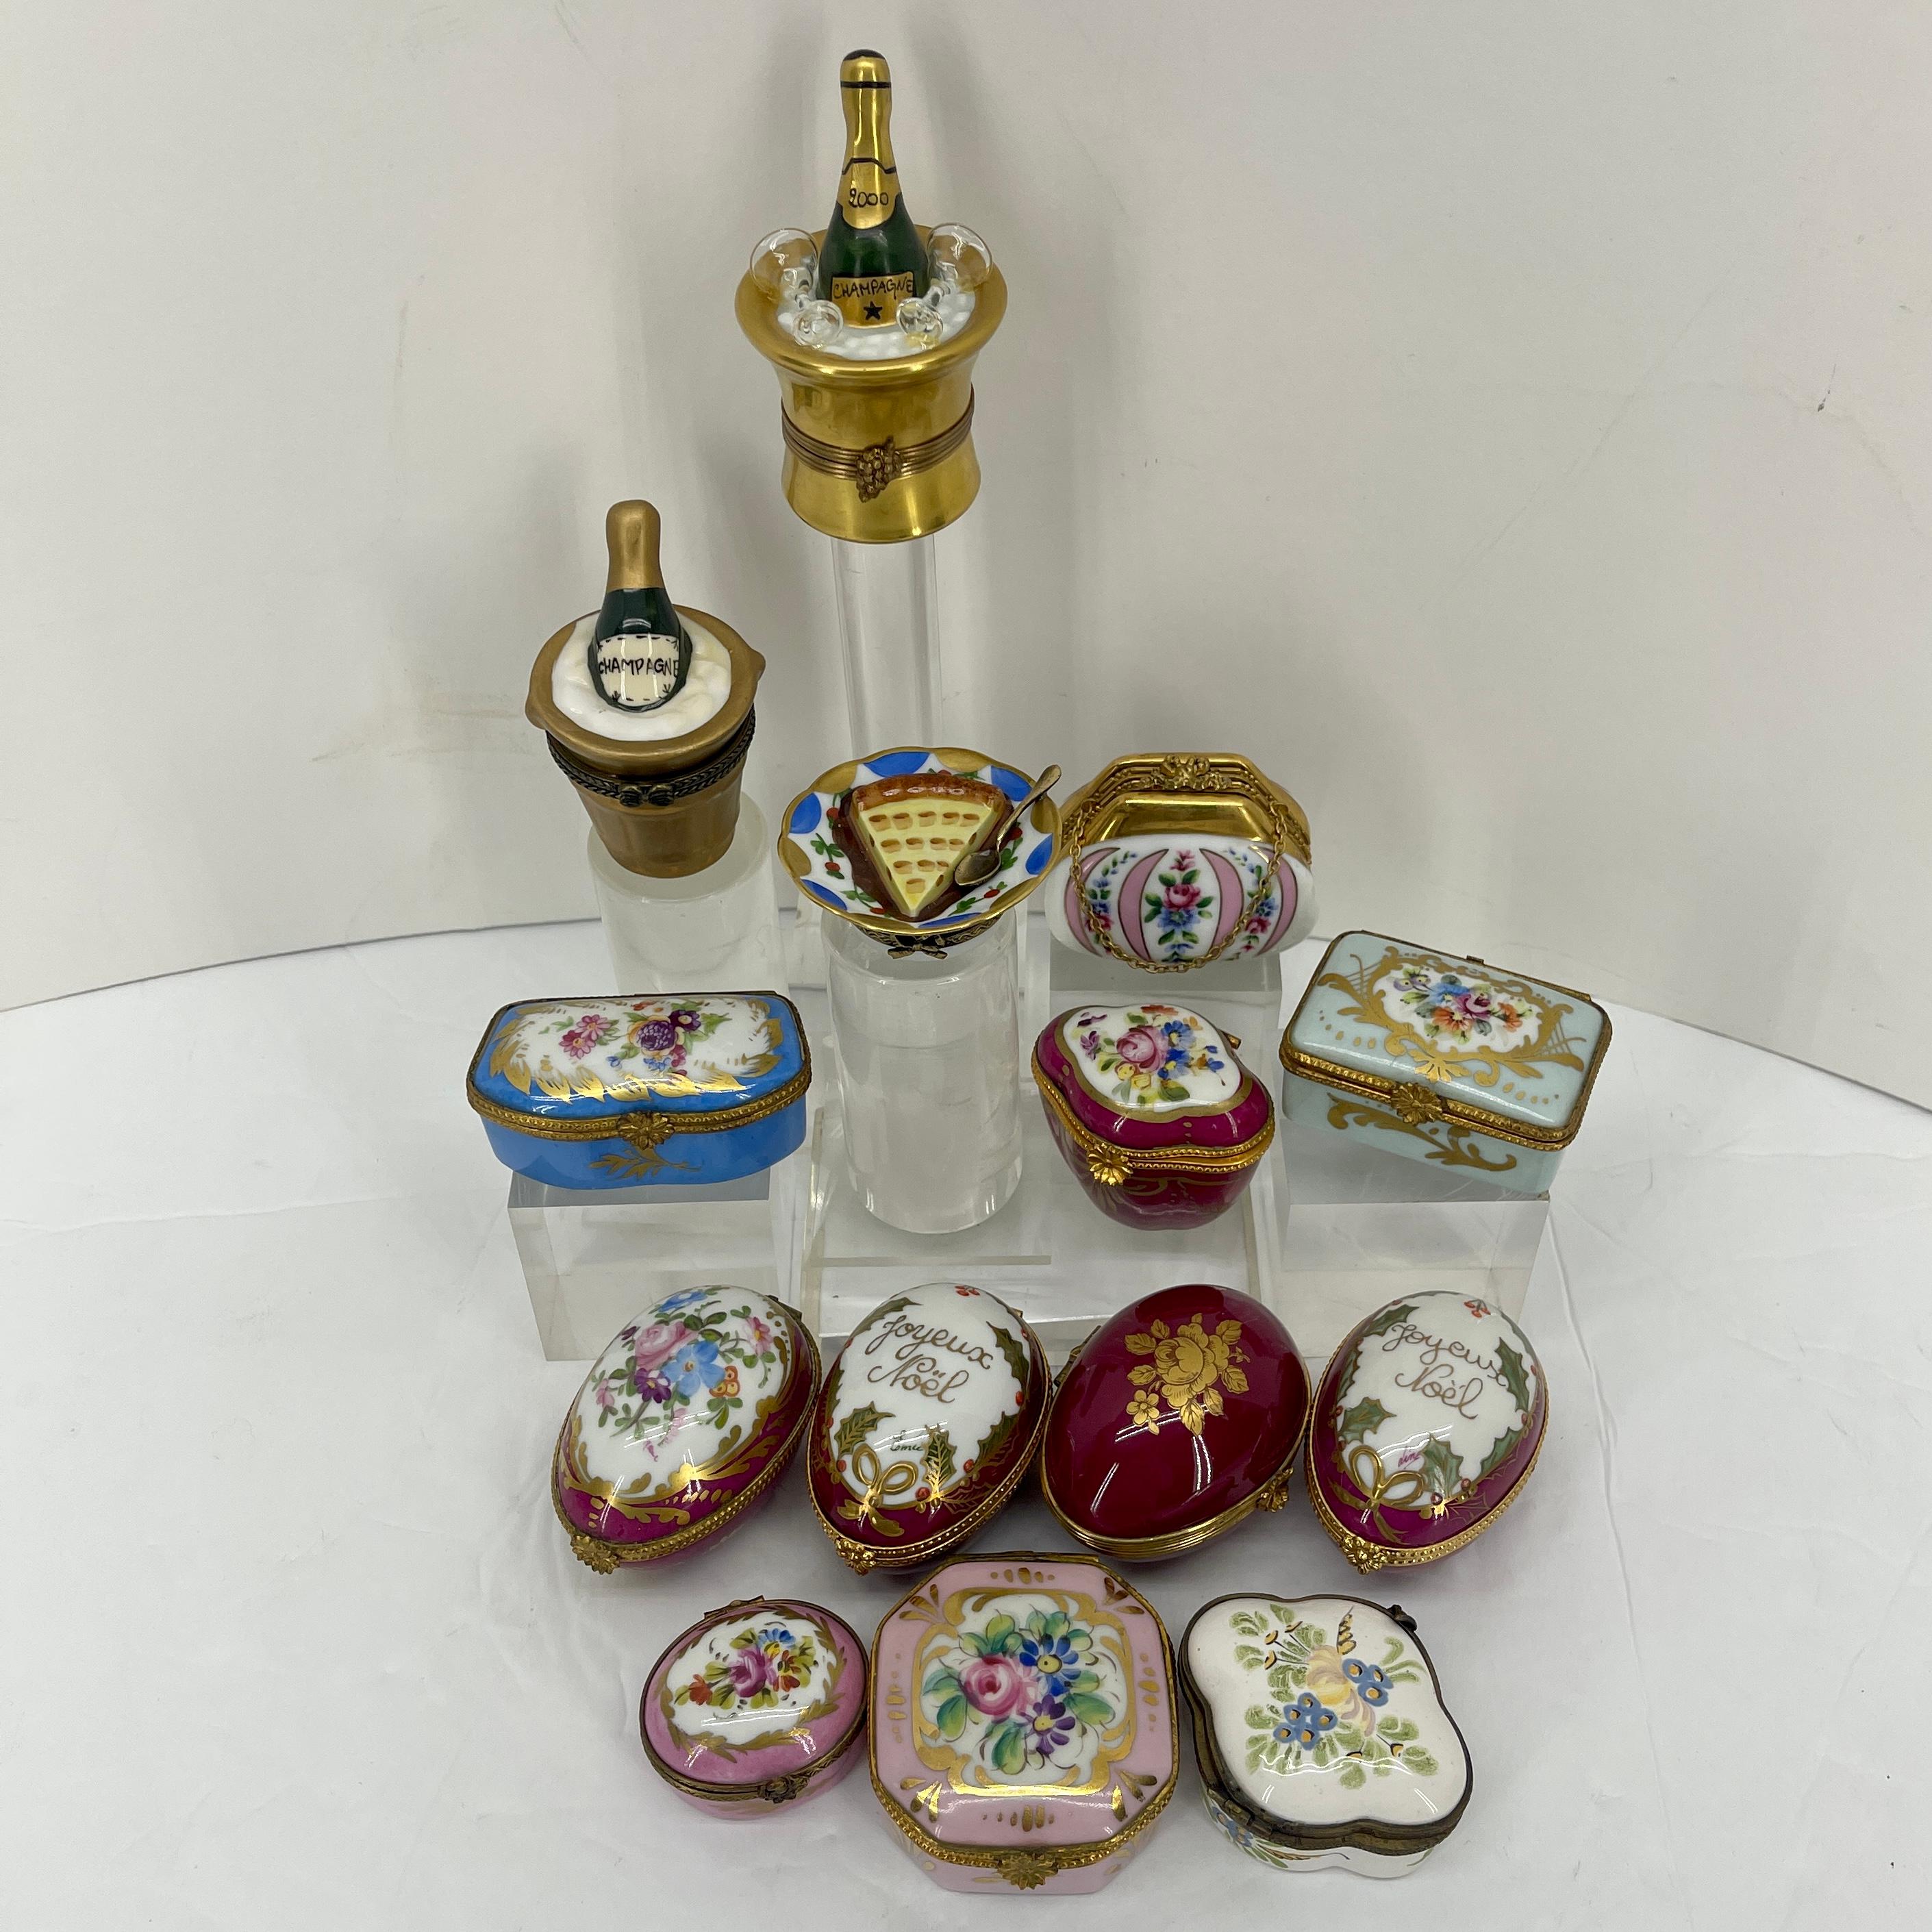 20th Century Collection of 14 Porcelain Trinket Hand Painted Boxes, France